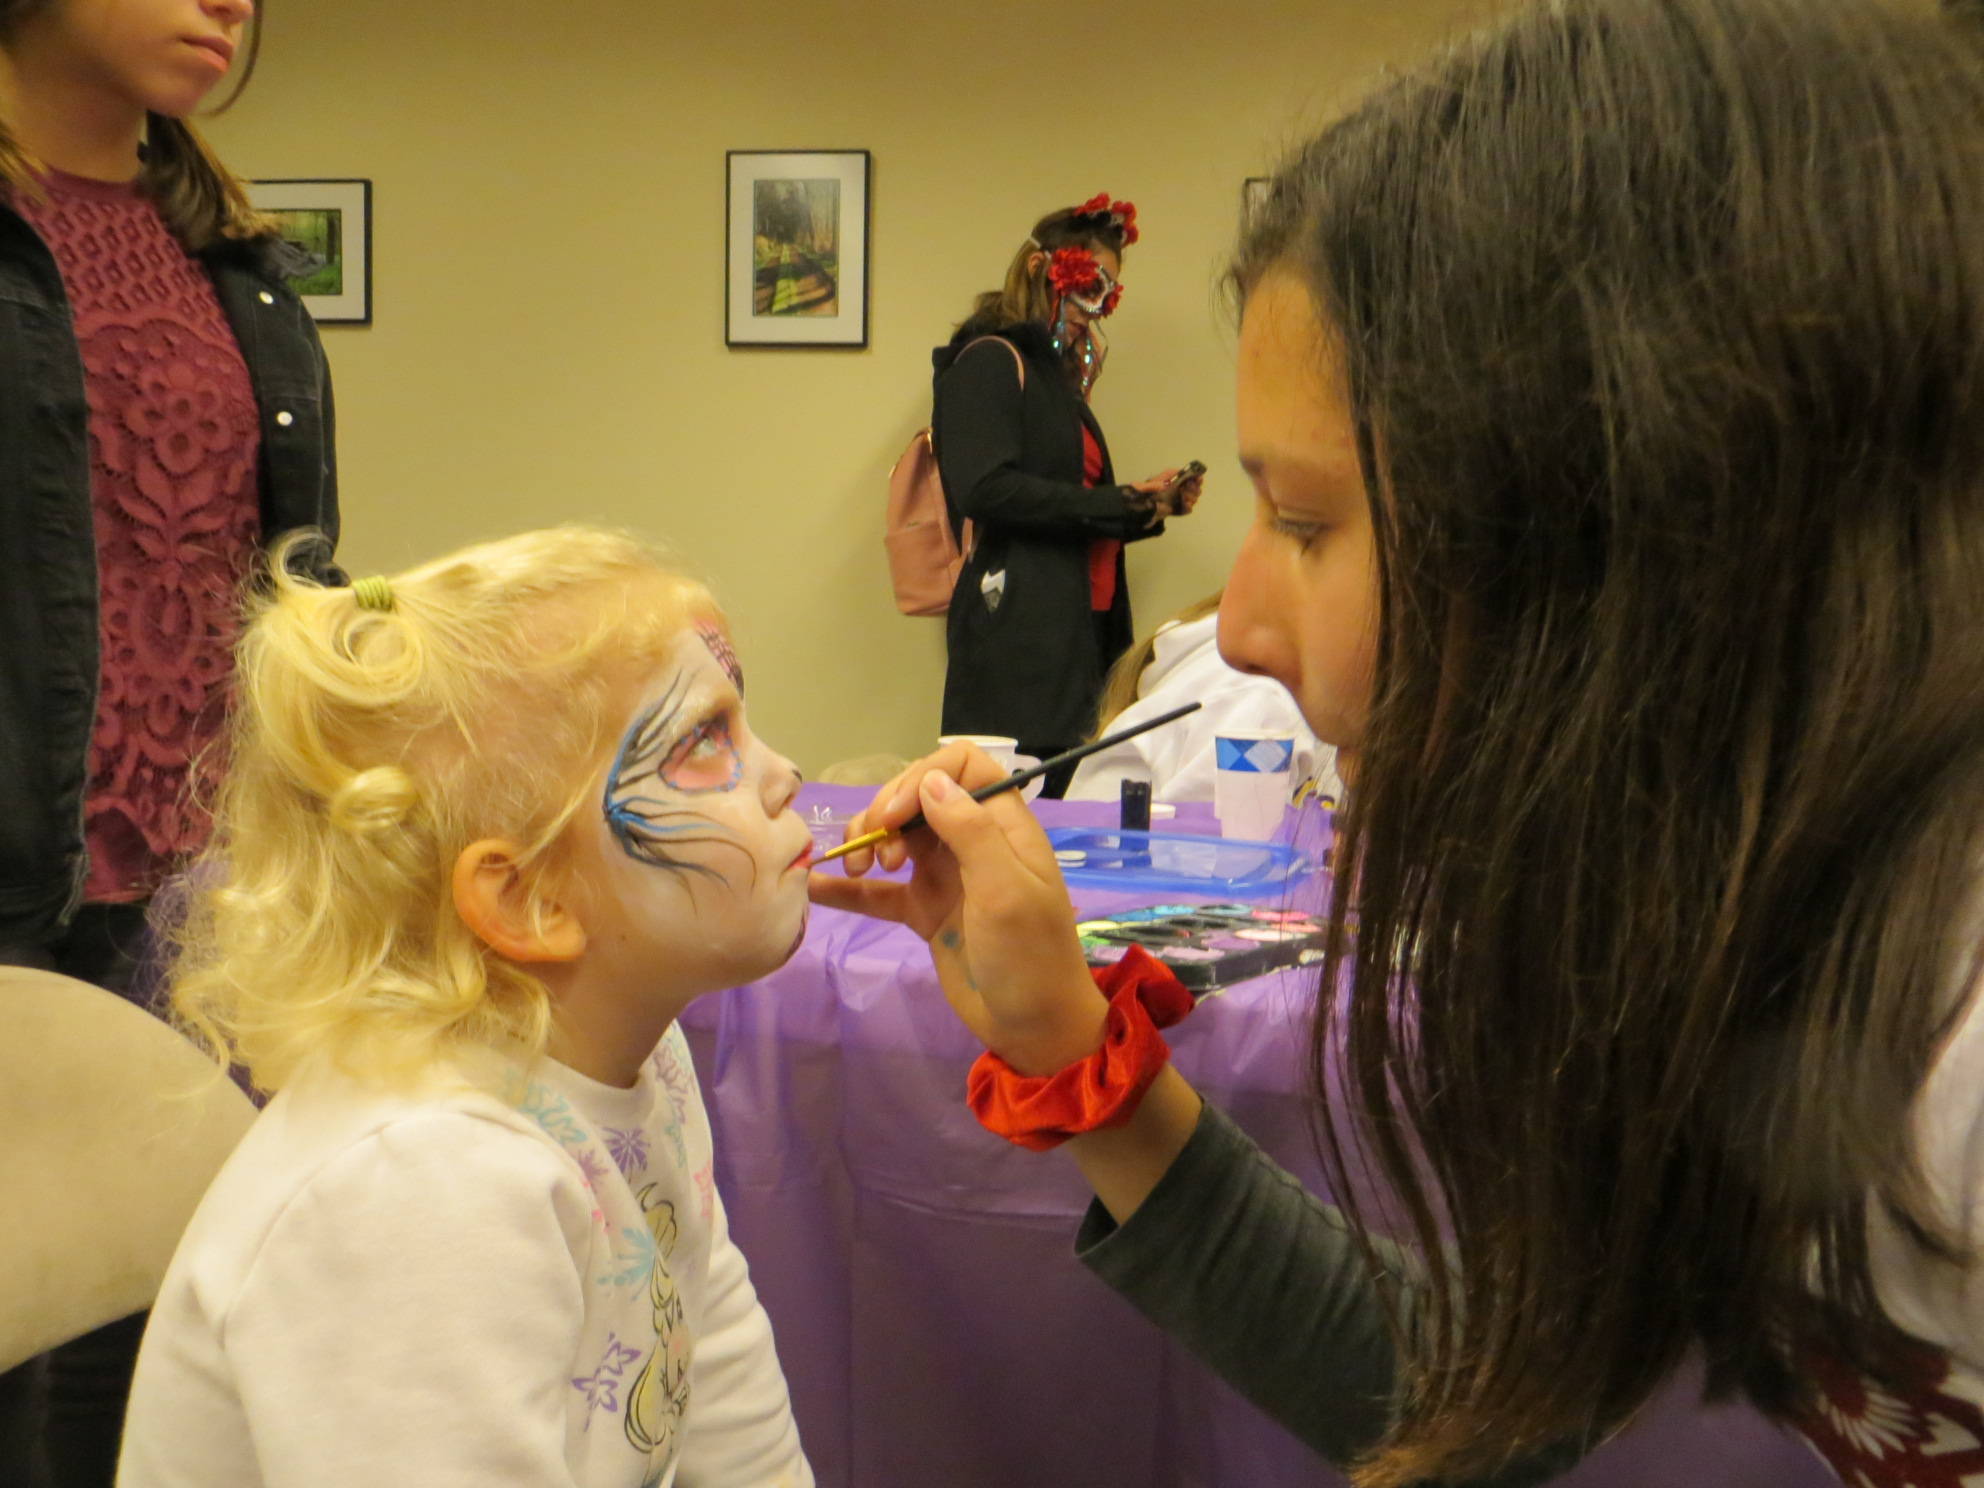 Isabelle Berube (left) gets her face painted by Saskia Visser at the Dia De Los Muertos celebration in downtown Issaquah. Samantha Pak/staff photo